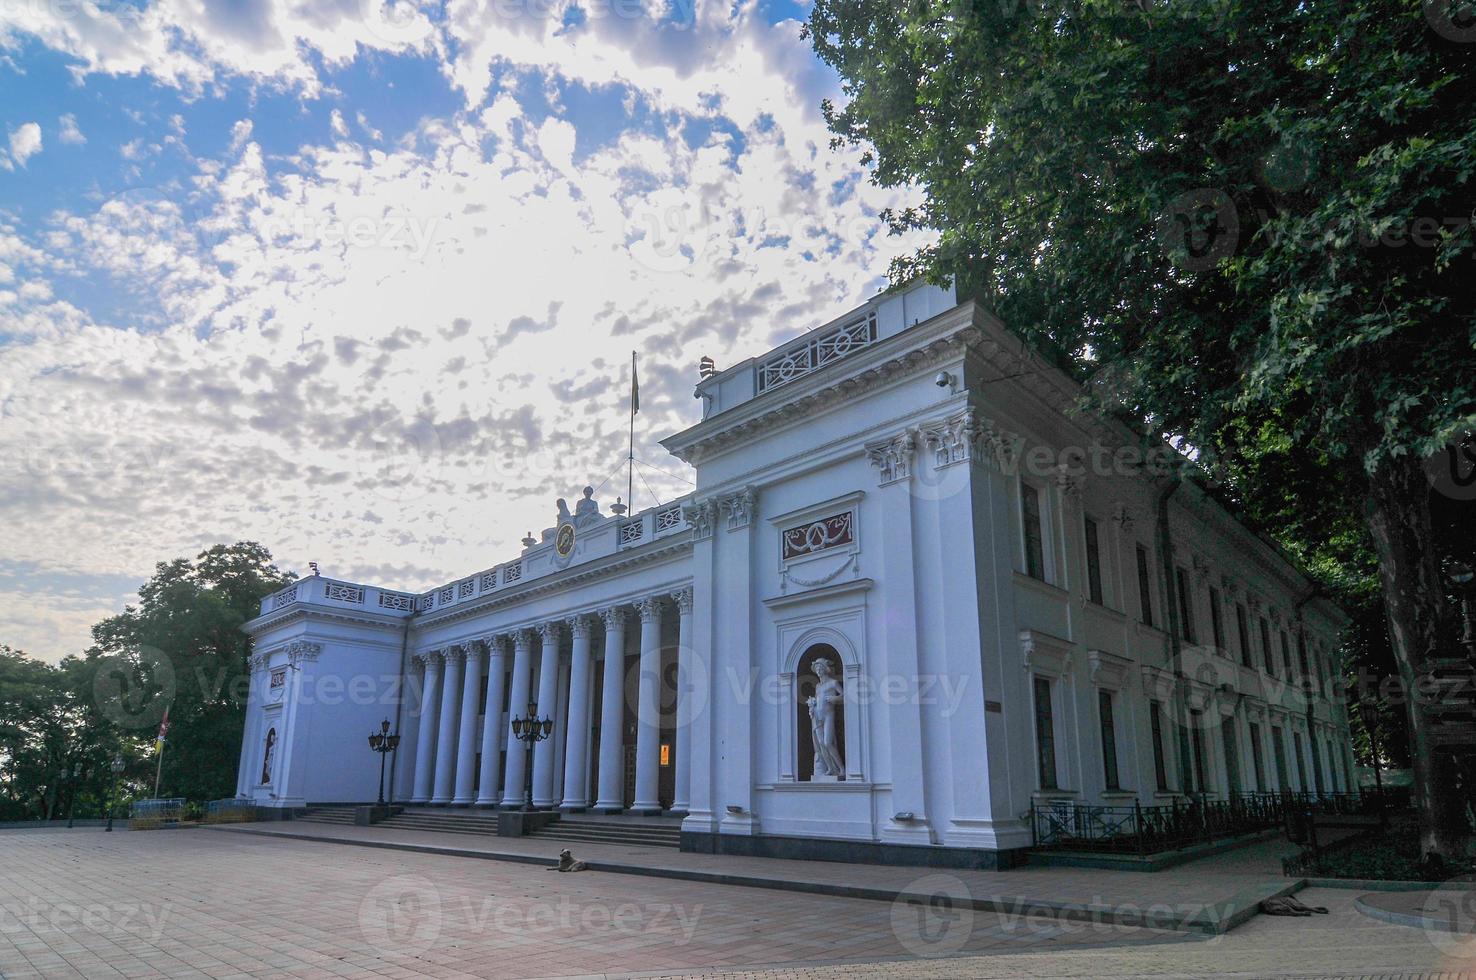 The building of the Odessa city council on Dumskaya square in Odessa, Ukraine. photo